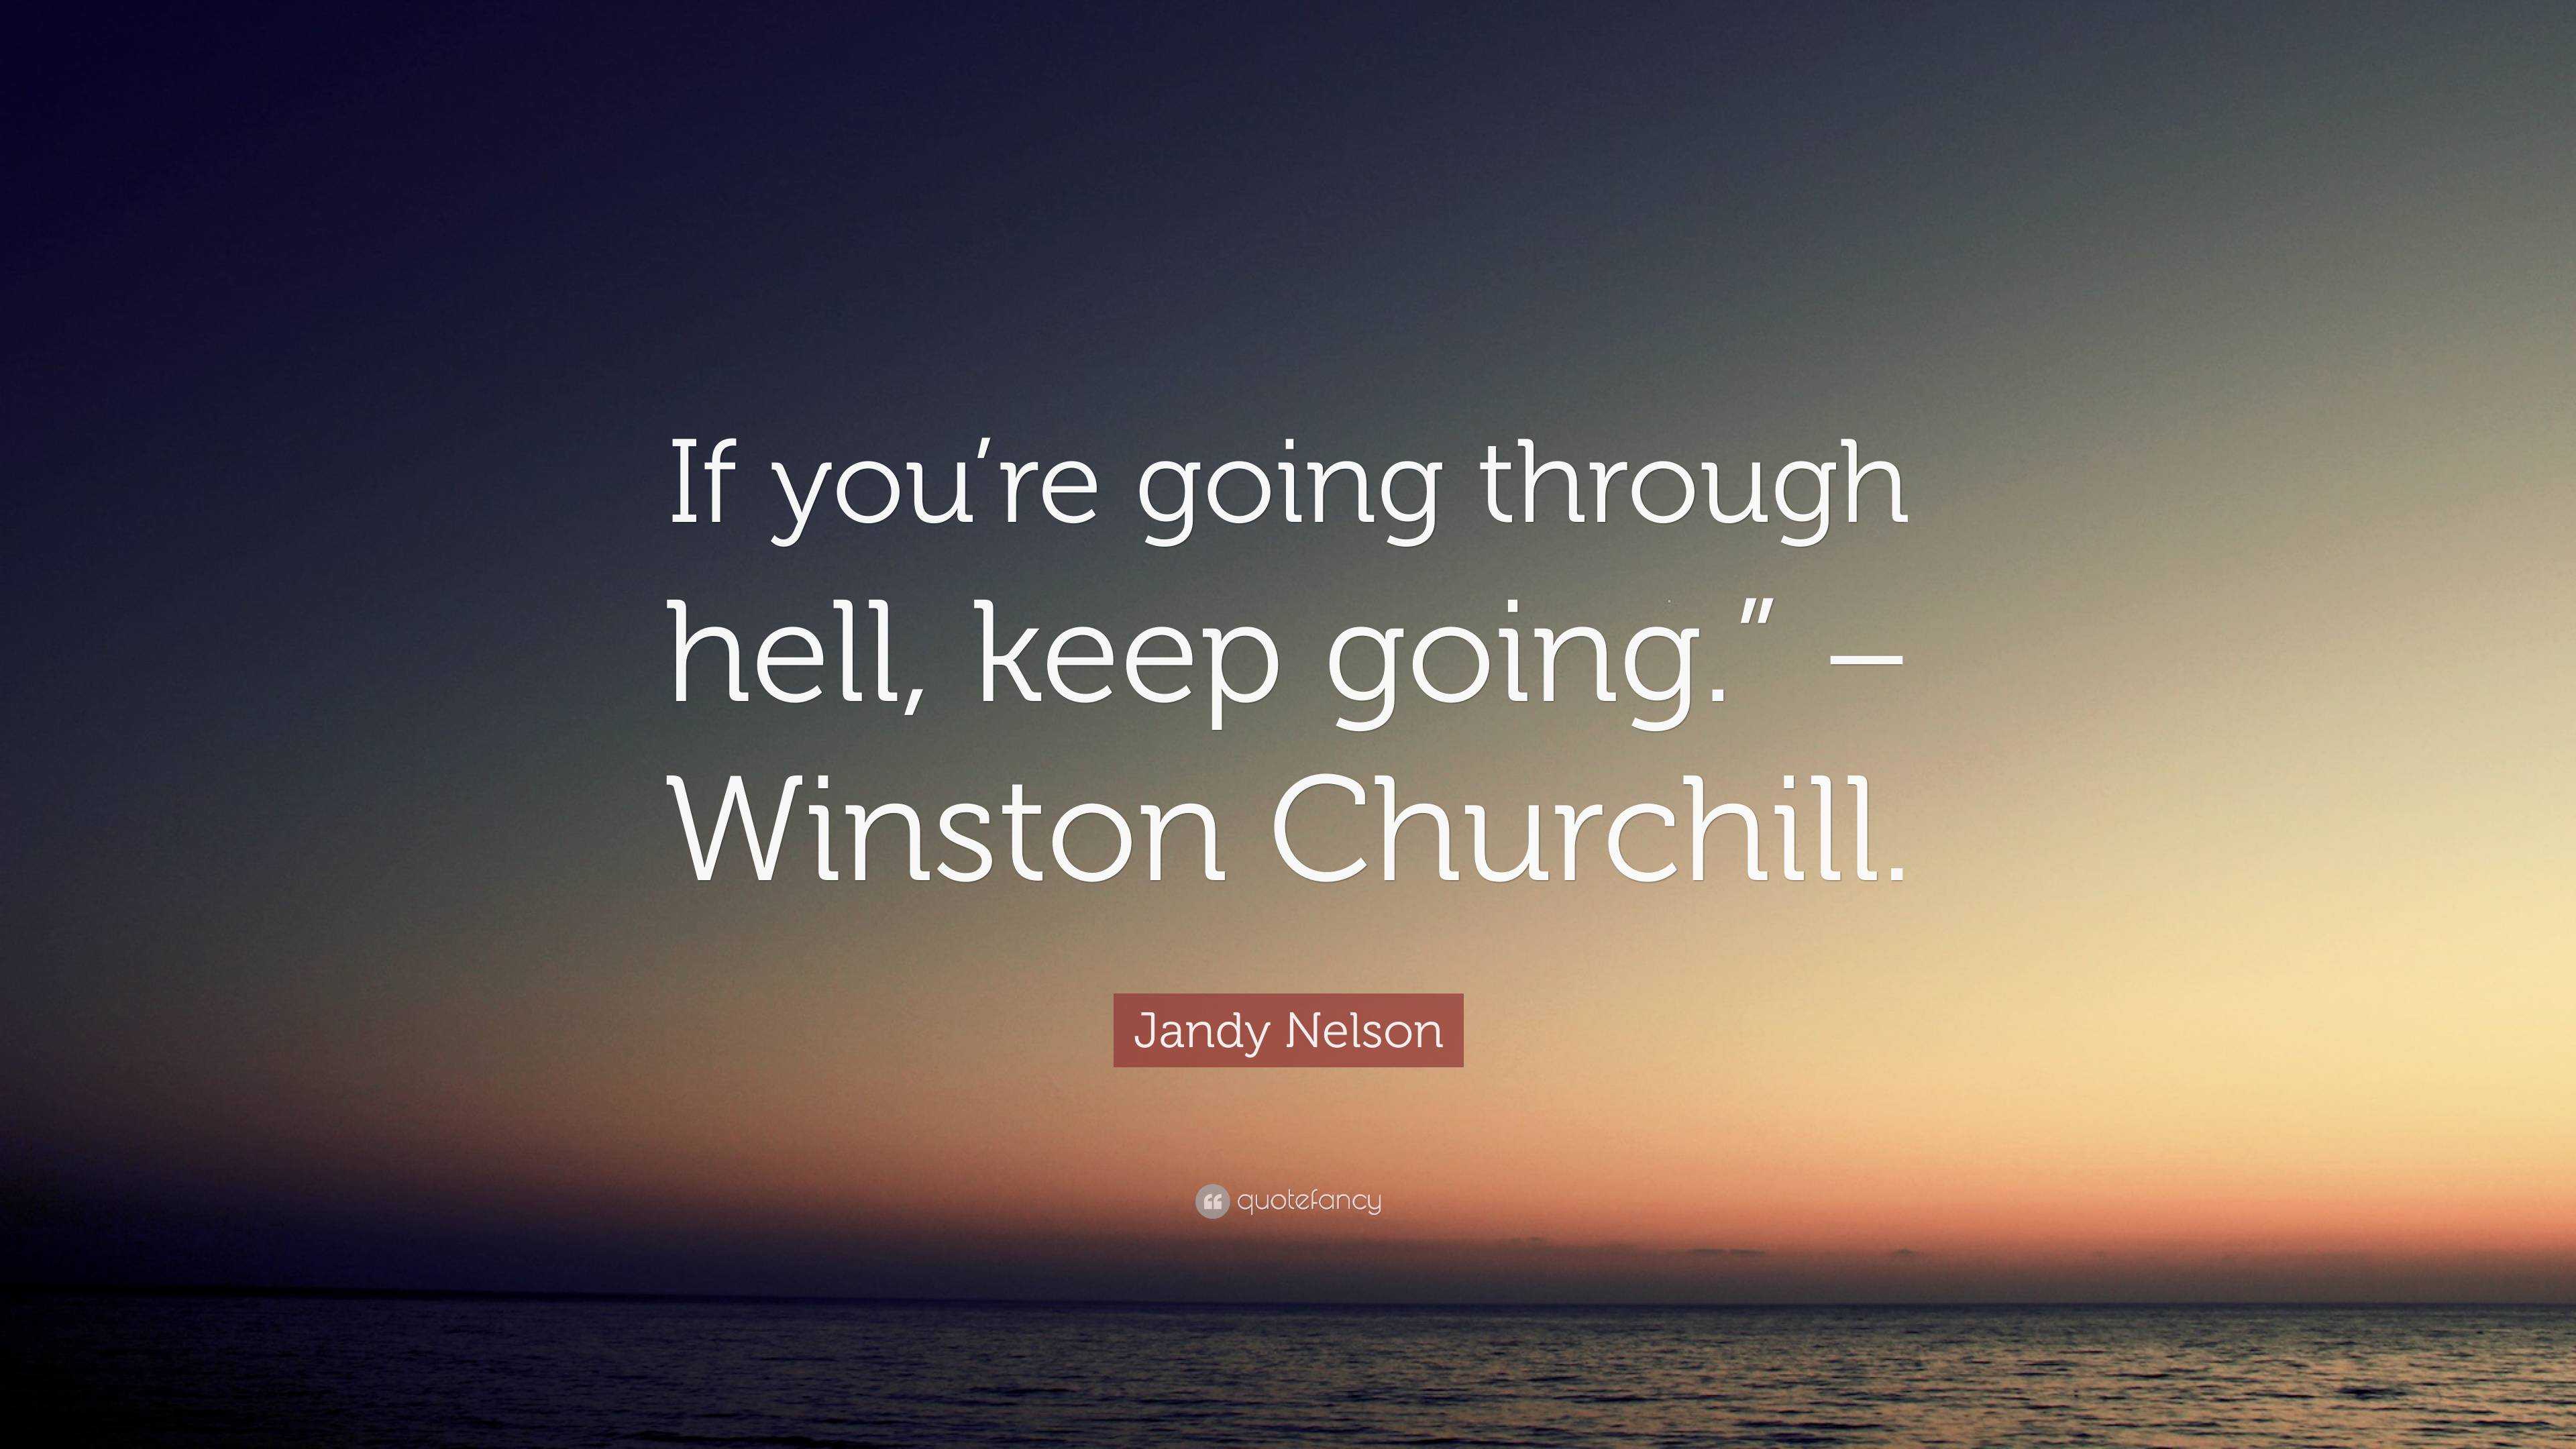 If you're going through hell, keep going. - Winston Churchill